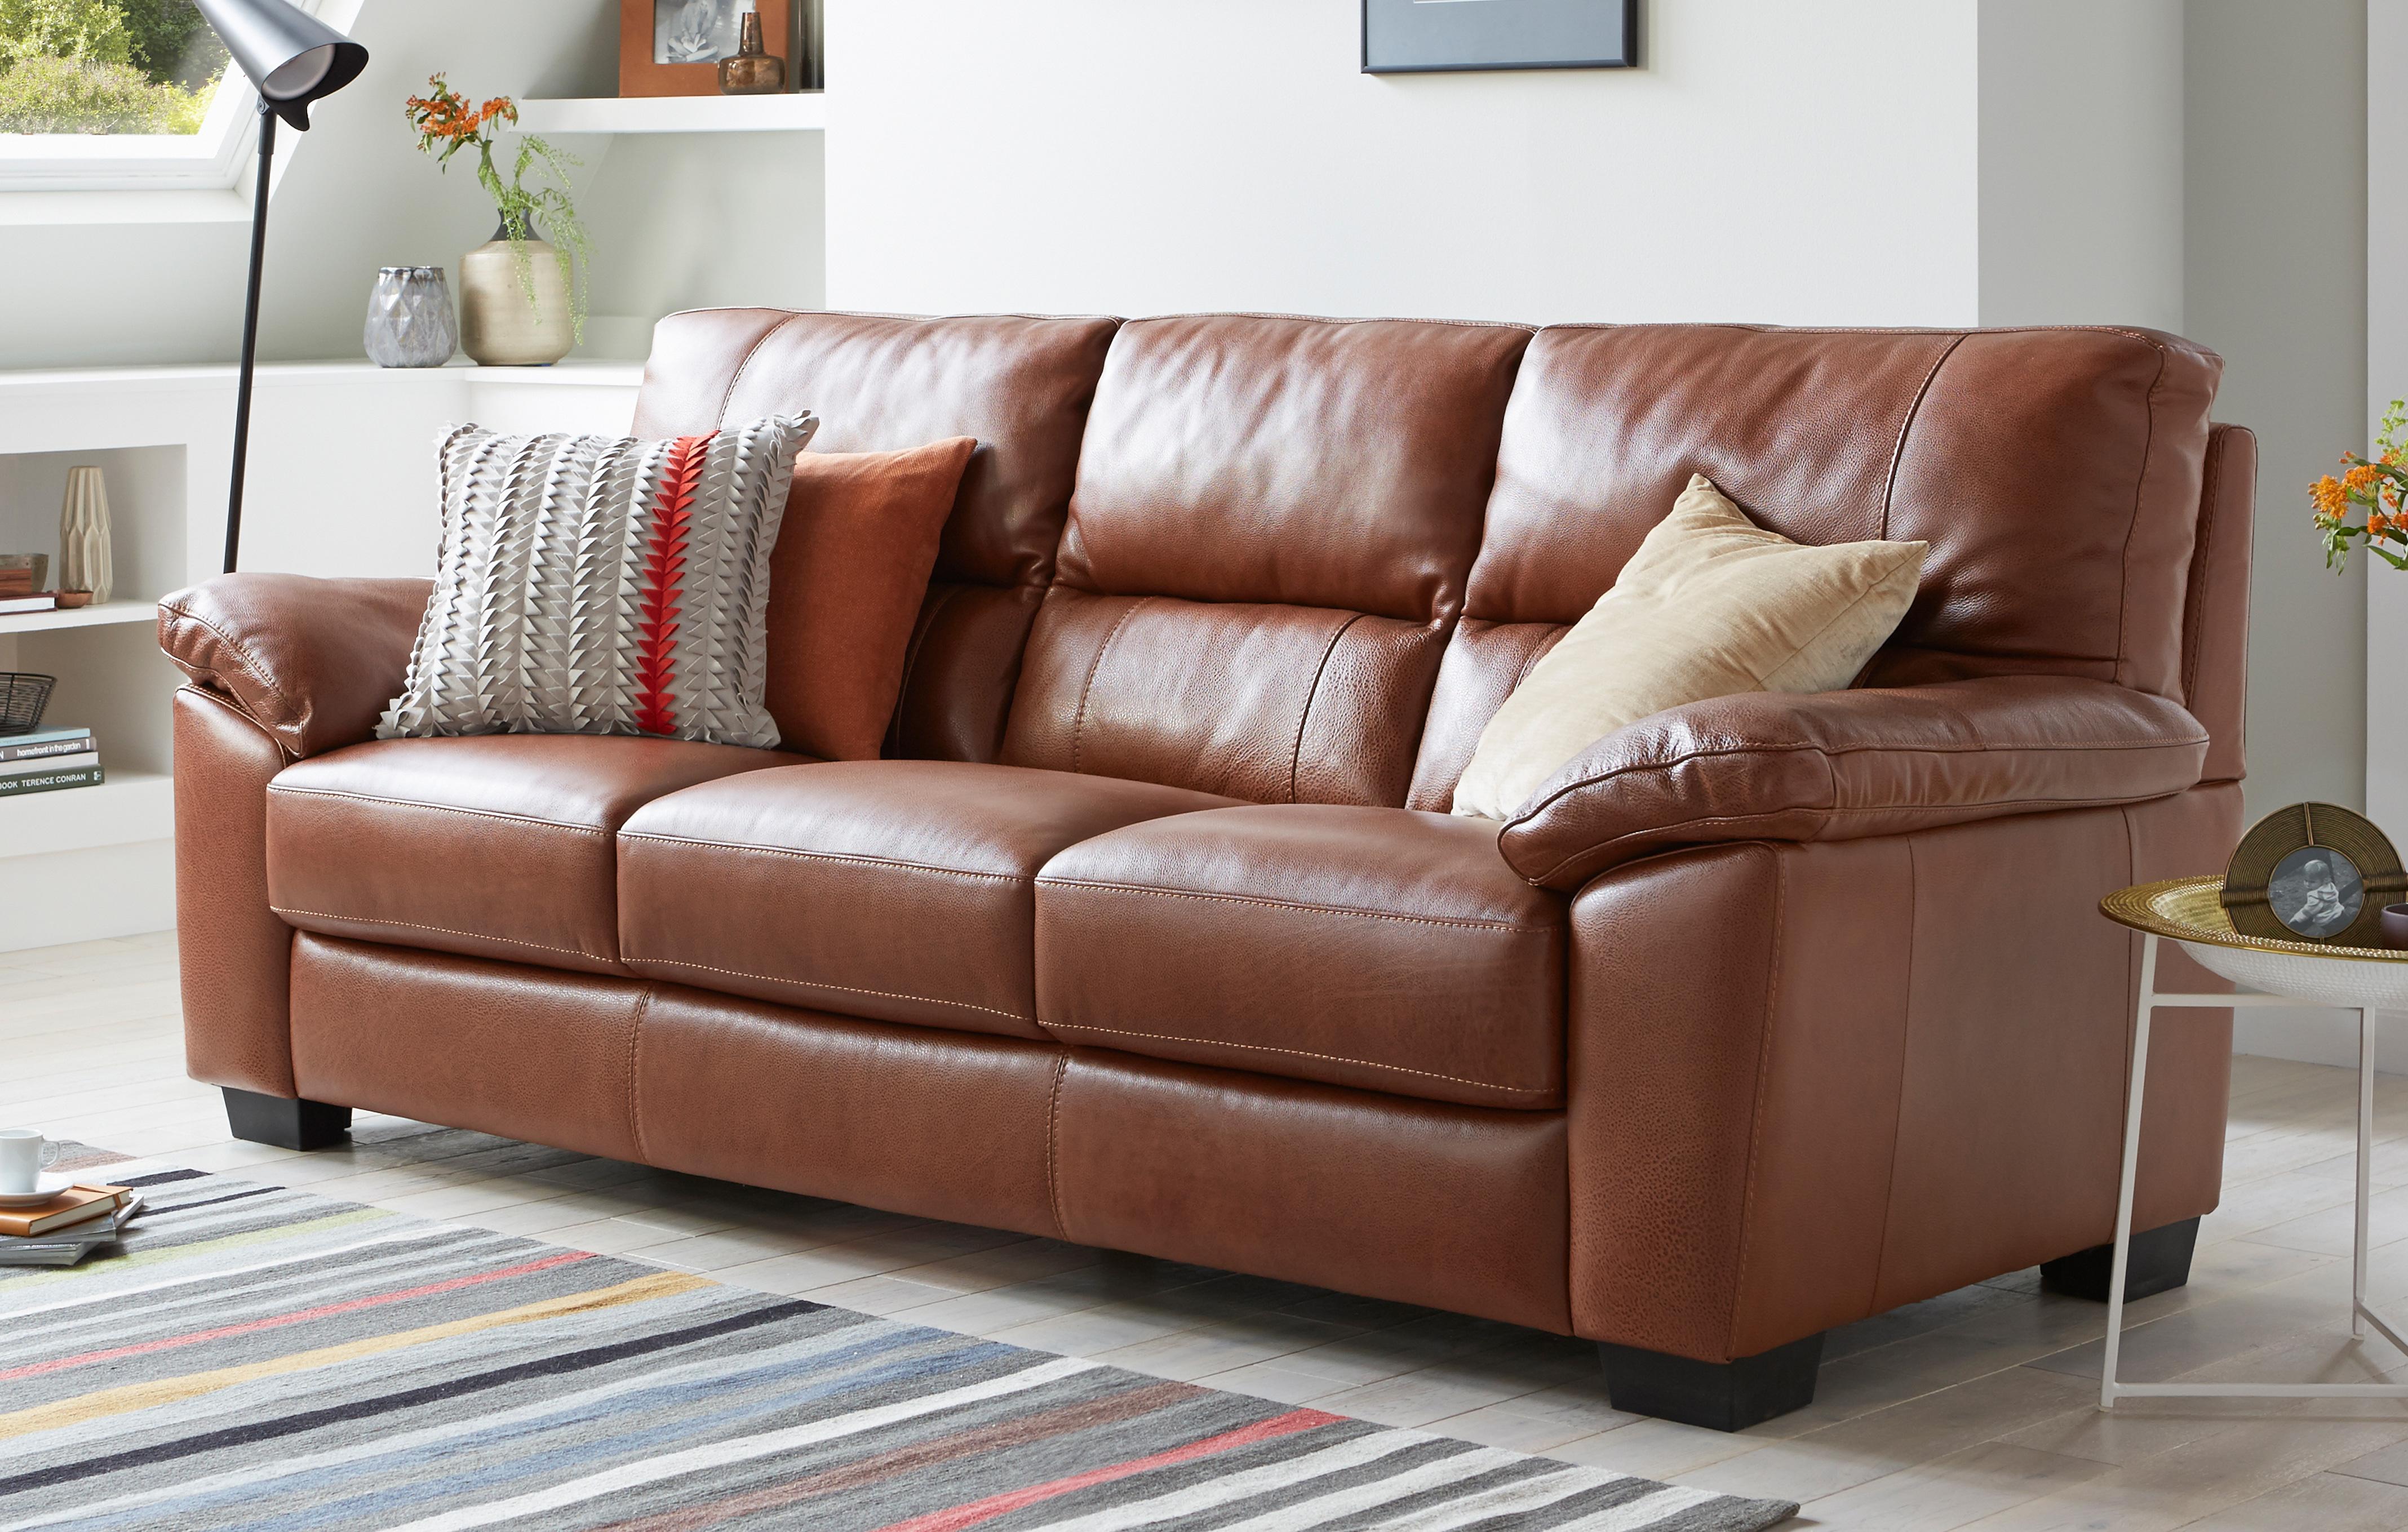 DFS Brown leather sofa used 